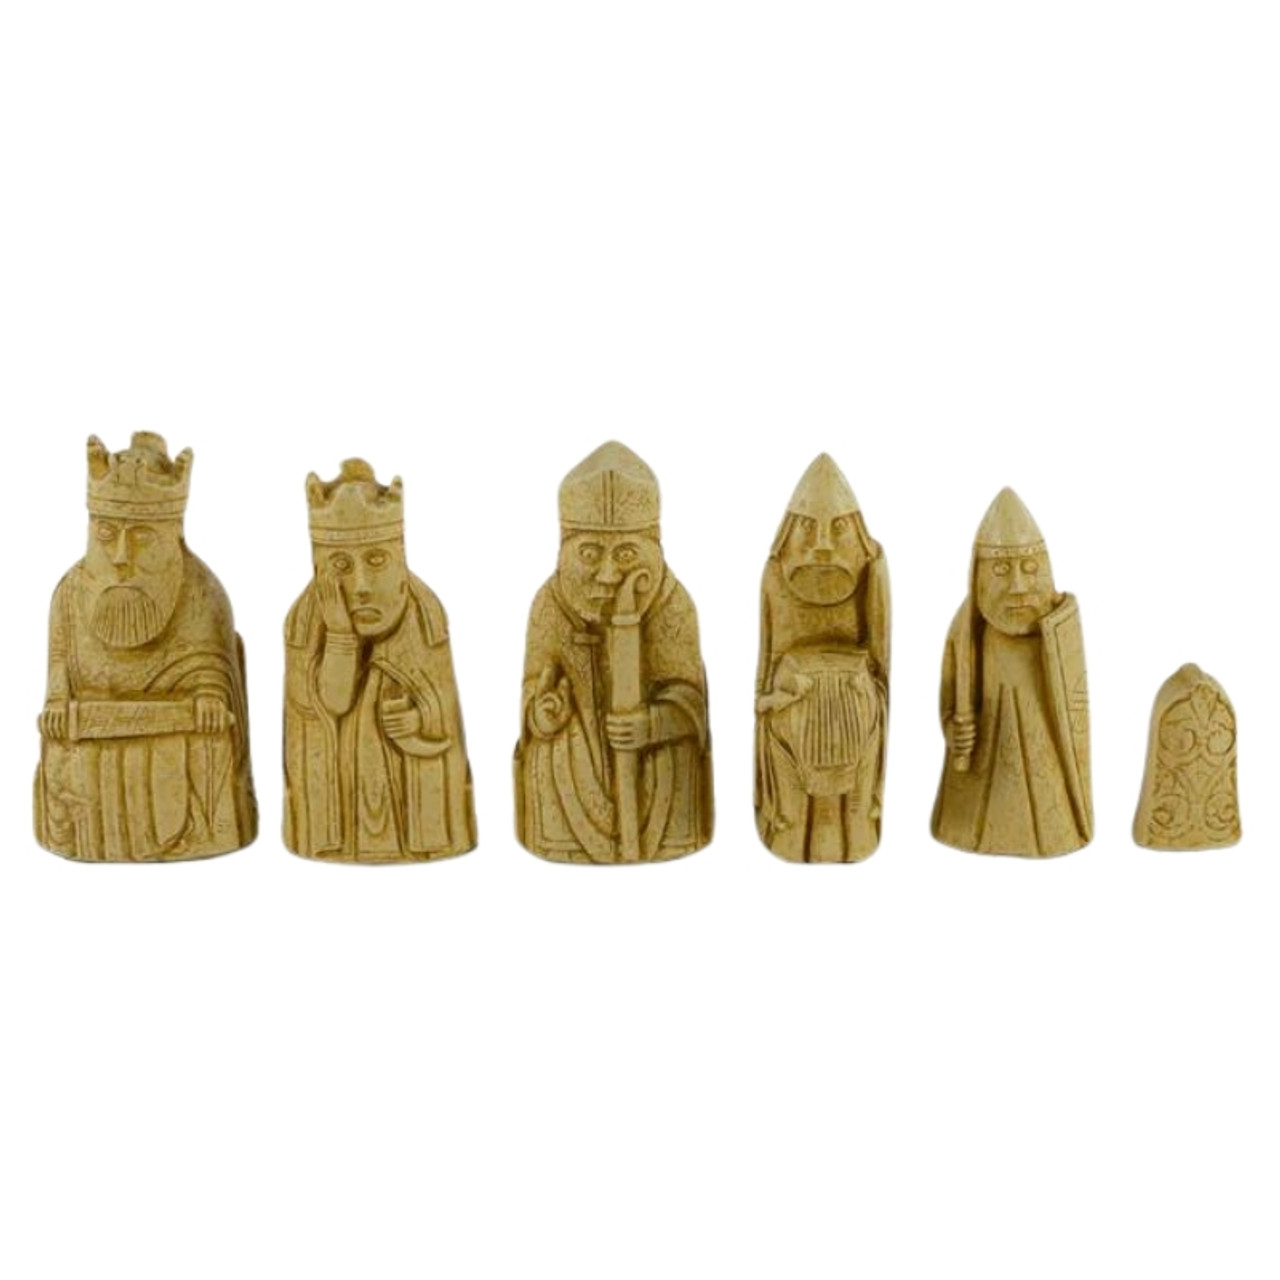 The Isle of Lewis Chess Pieces - Stone Resin Antique White and Rust Brown with 3.5" King white pieces